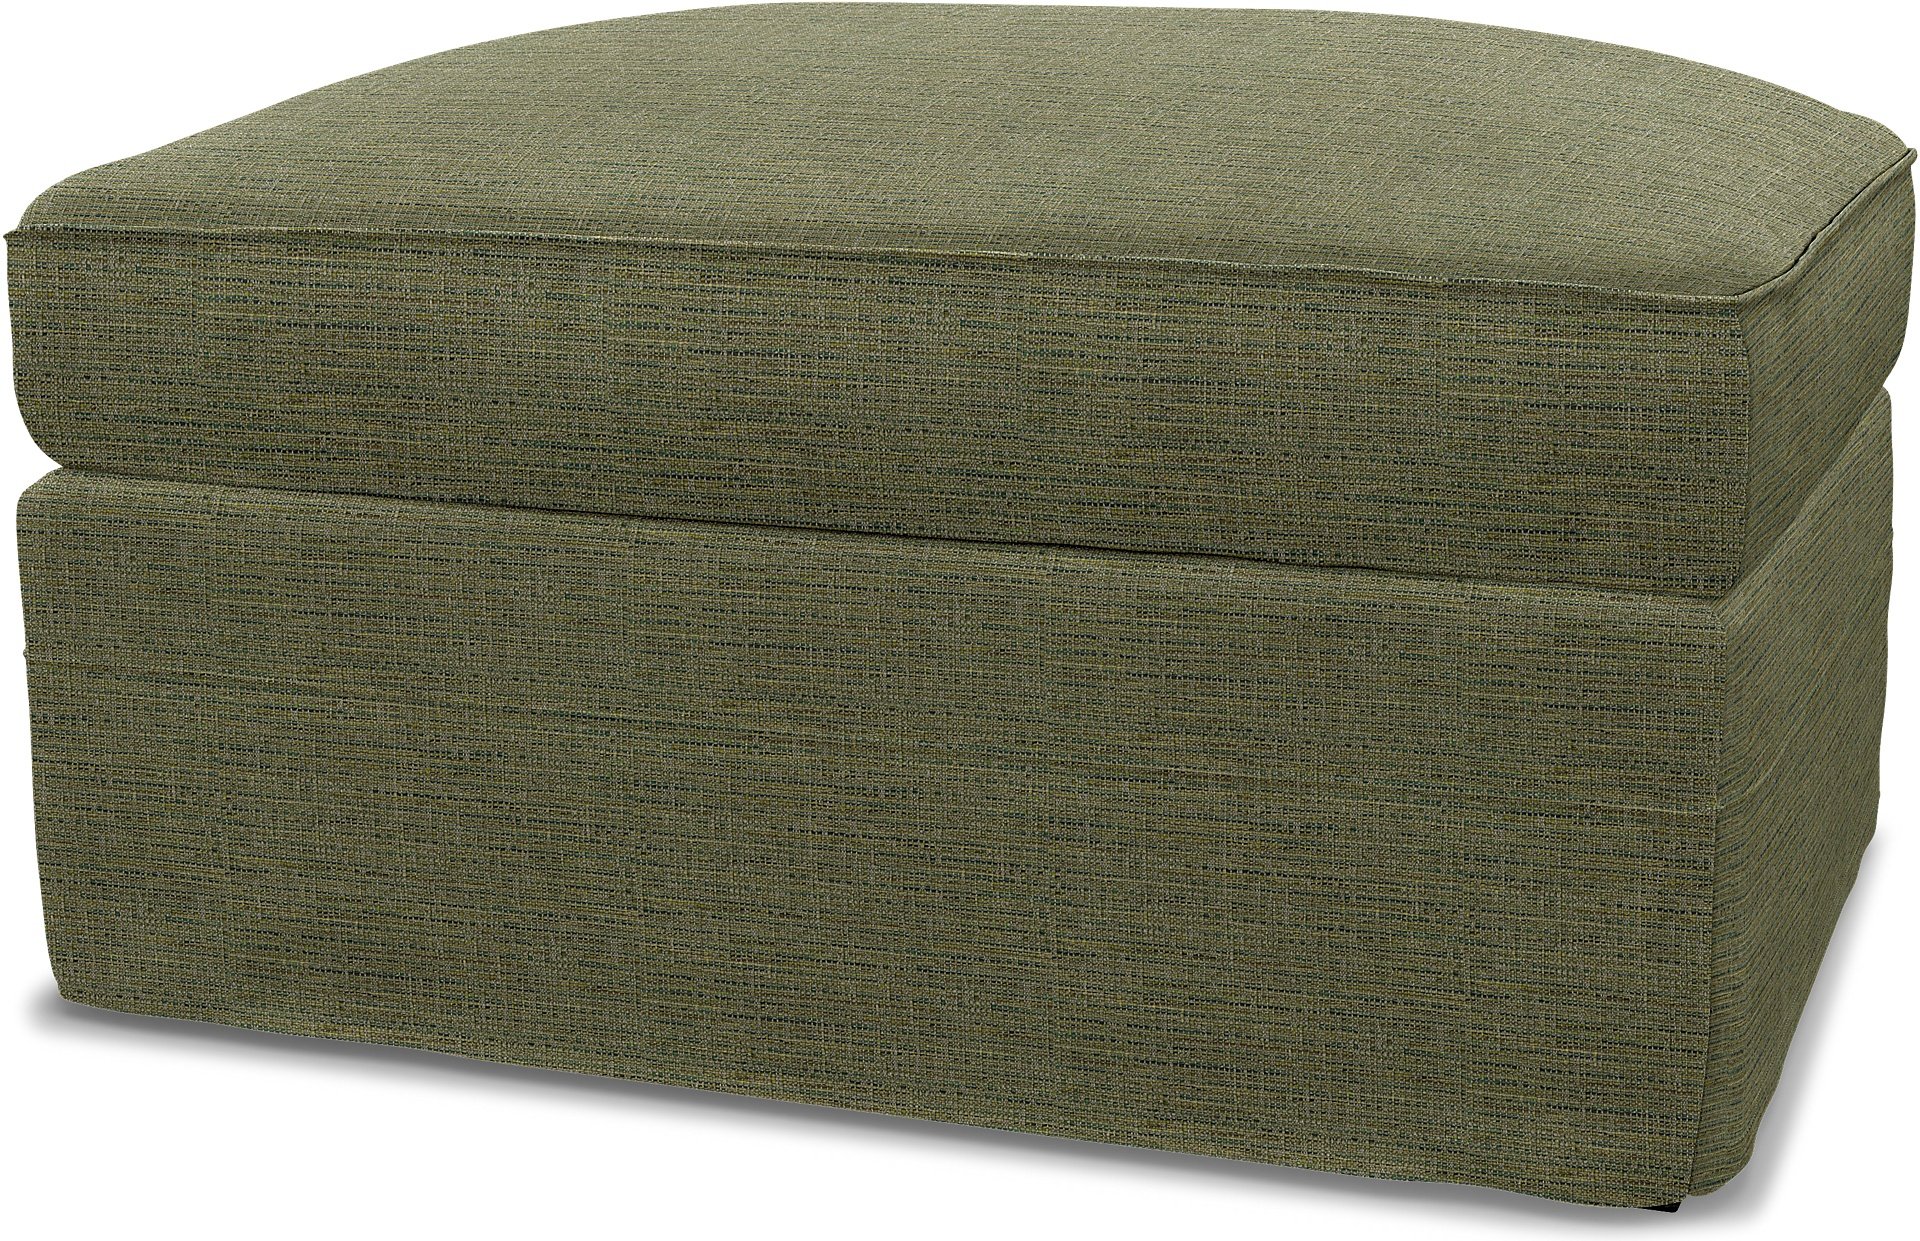 IKEA - Gronlid Footstool with Storage Cover, Meadow Green, Boucle & Texture - Bemz